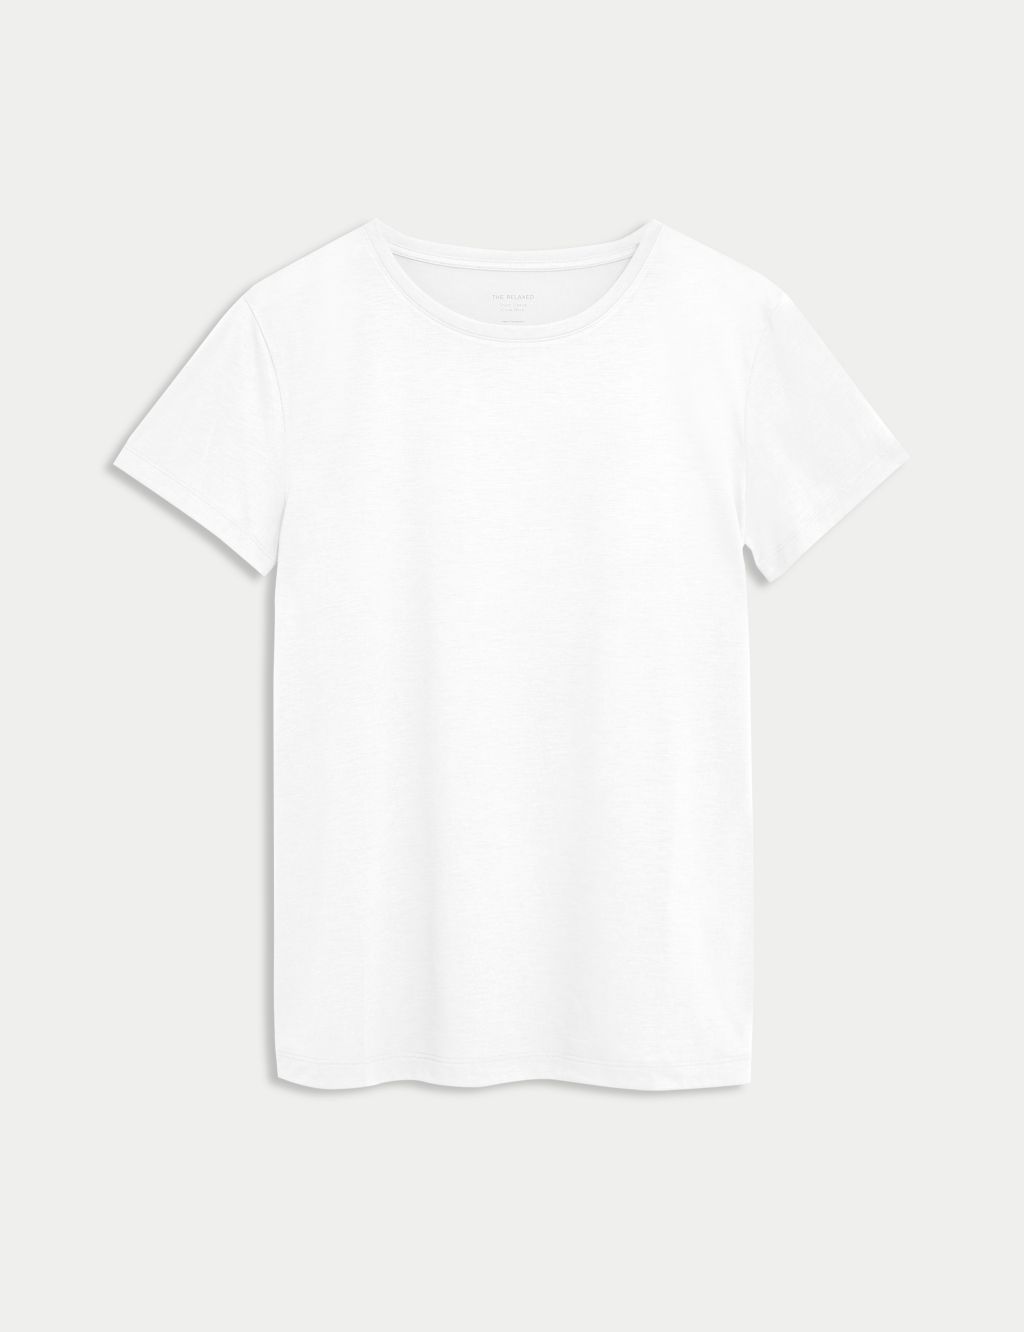 Relaxed Short Sleeve T-Shirt image 2